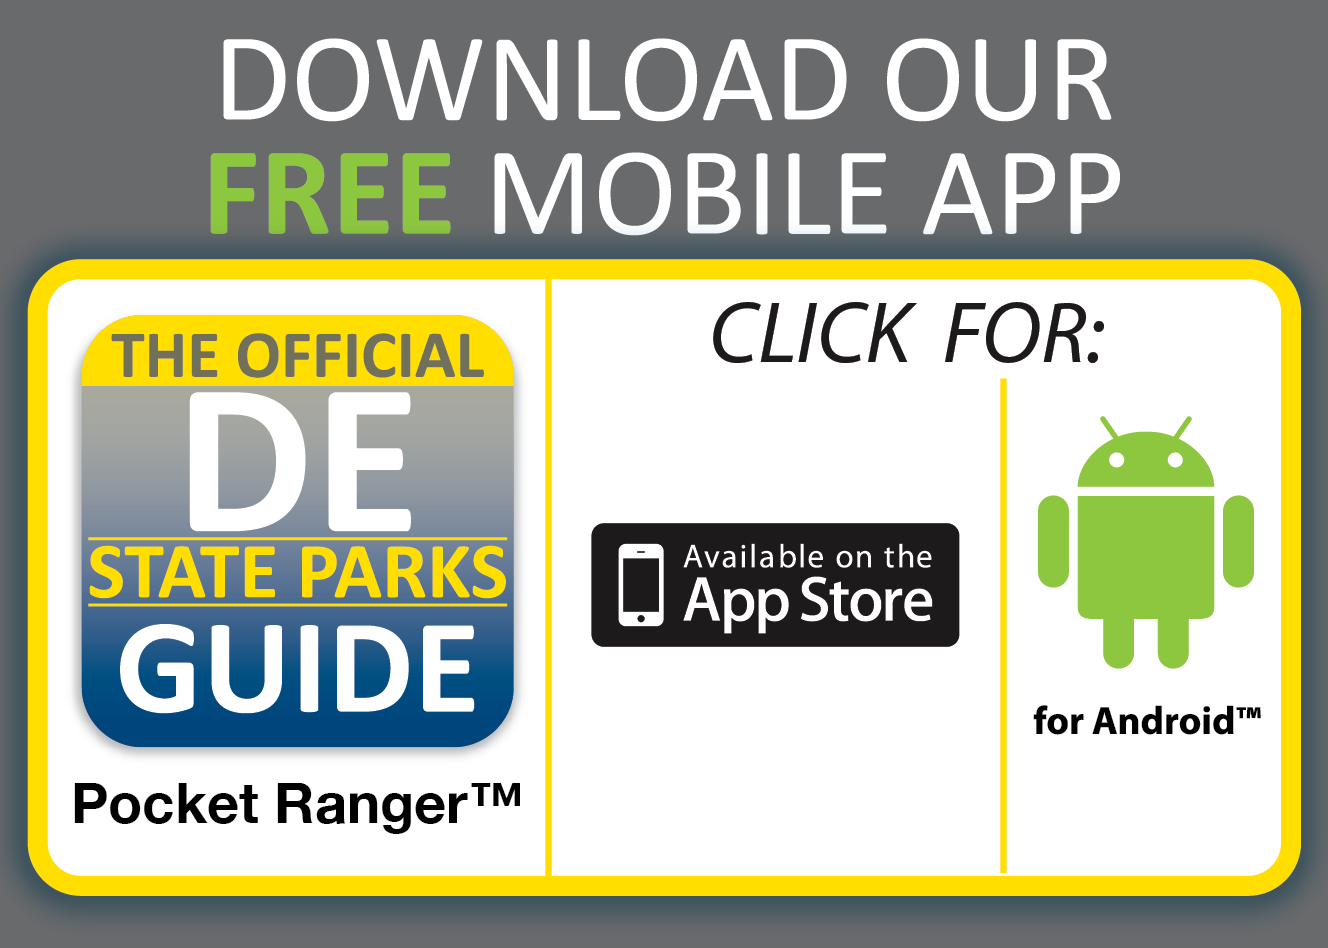 Download our FREE app -- iPhone and Android versions!